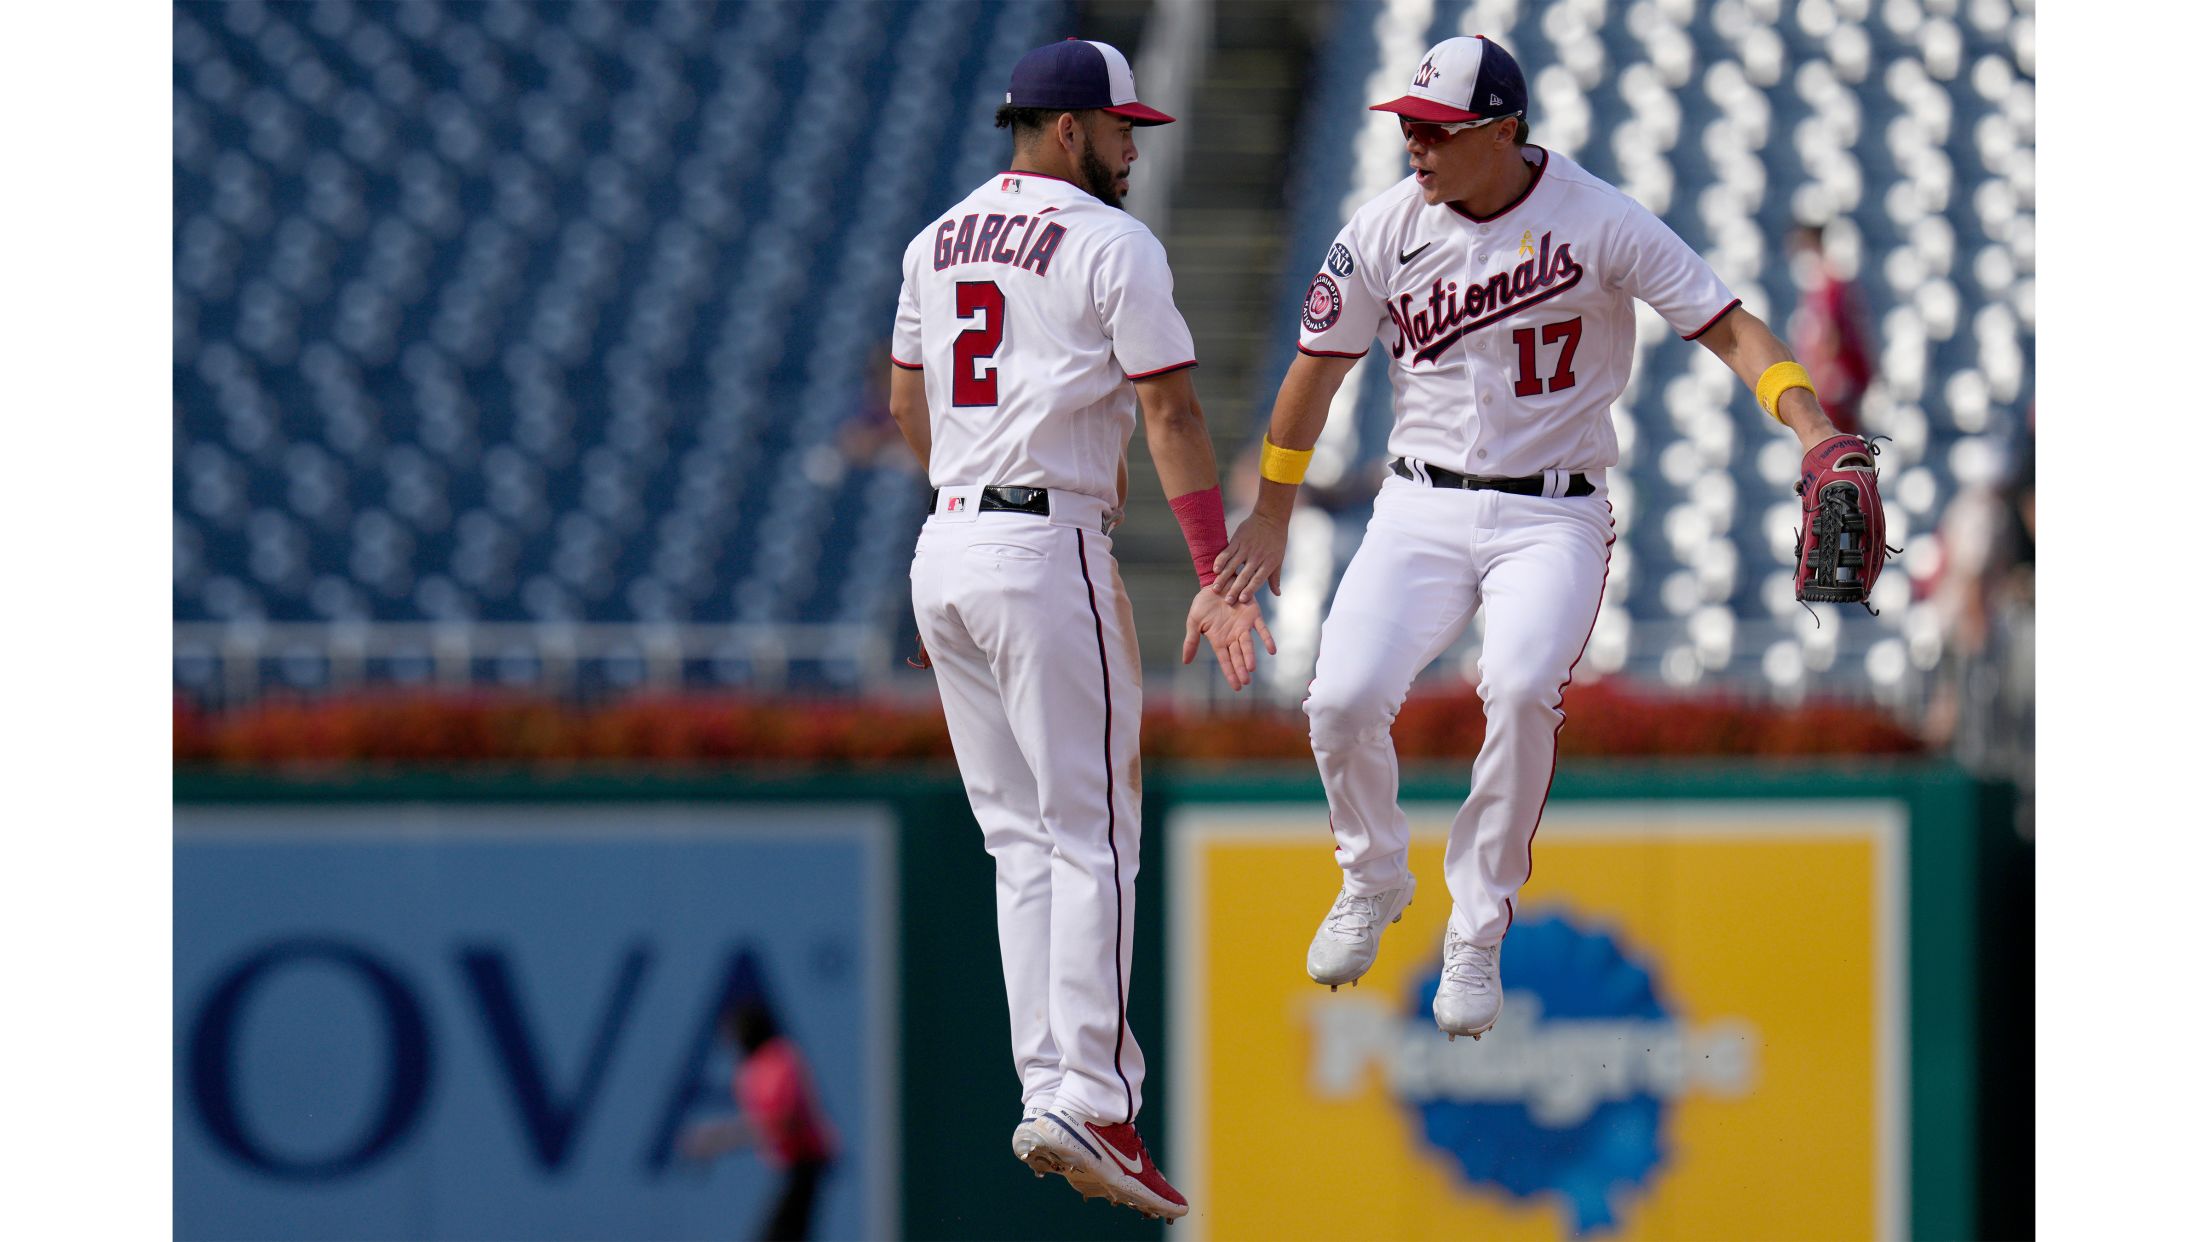 The Nationals' New Uniforms: In Pictures